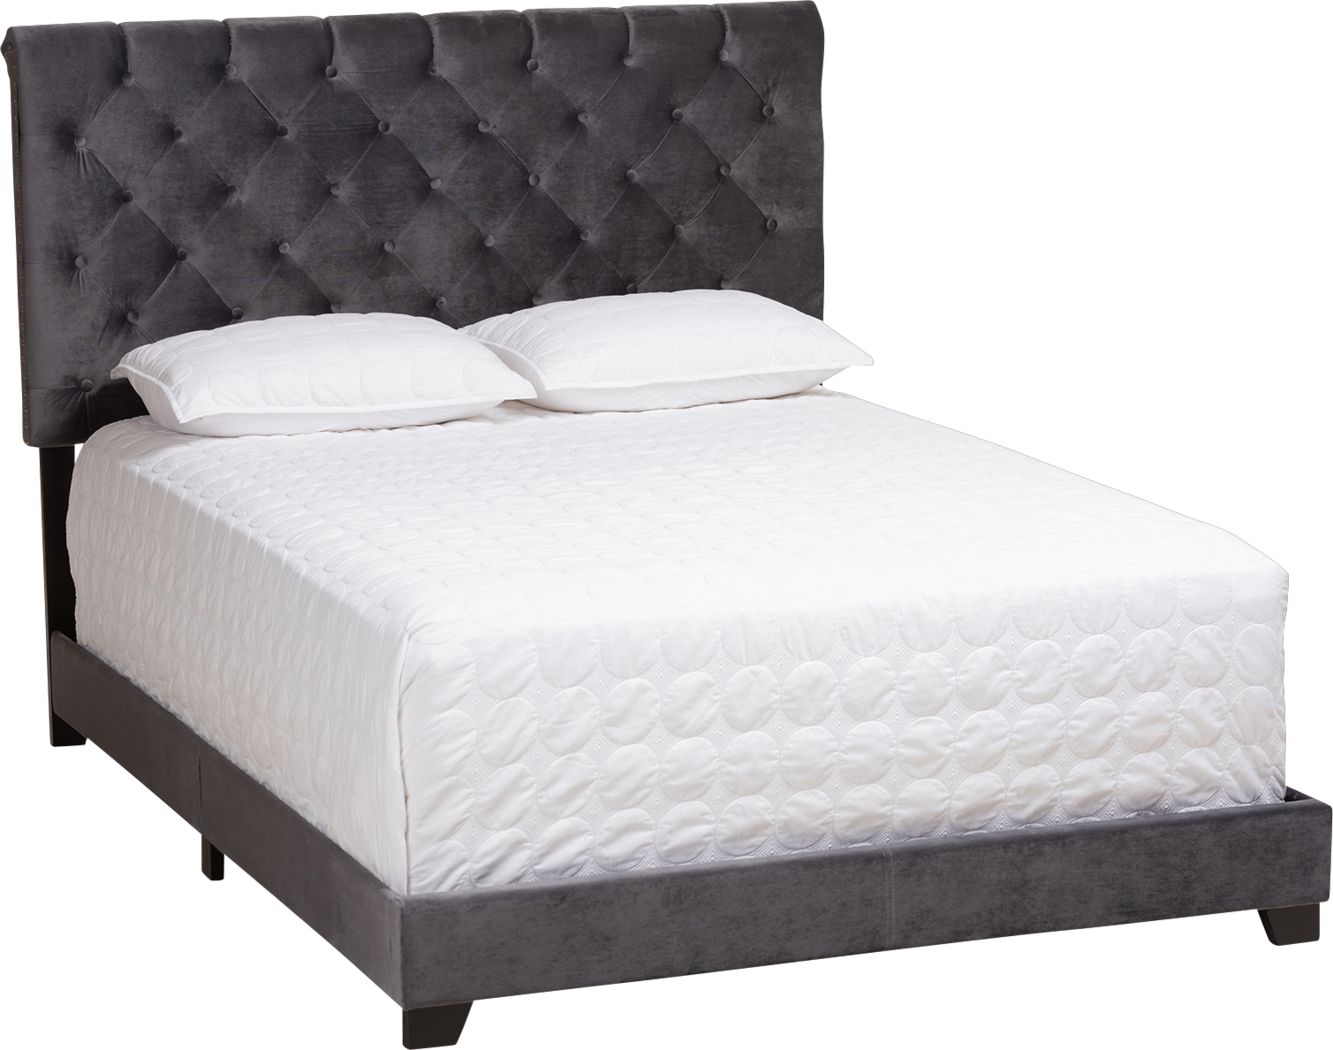 King Beds, Rooms To Go King Size Bed Frame